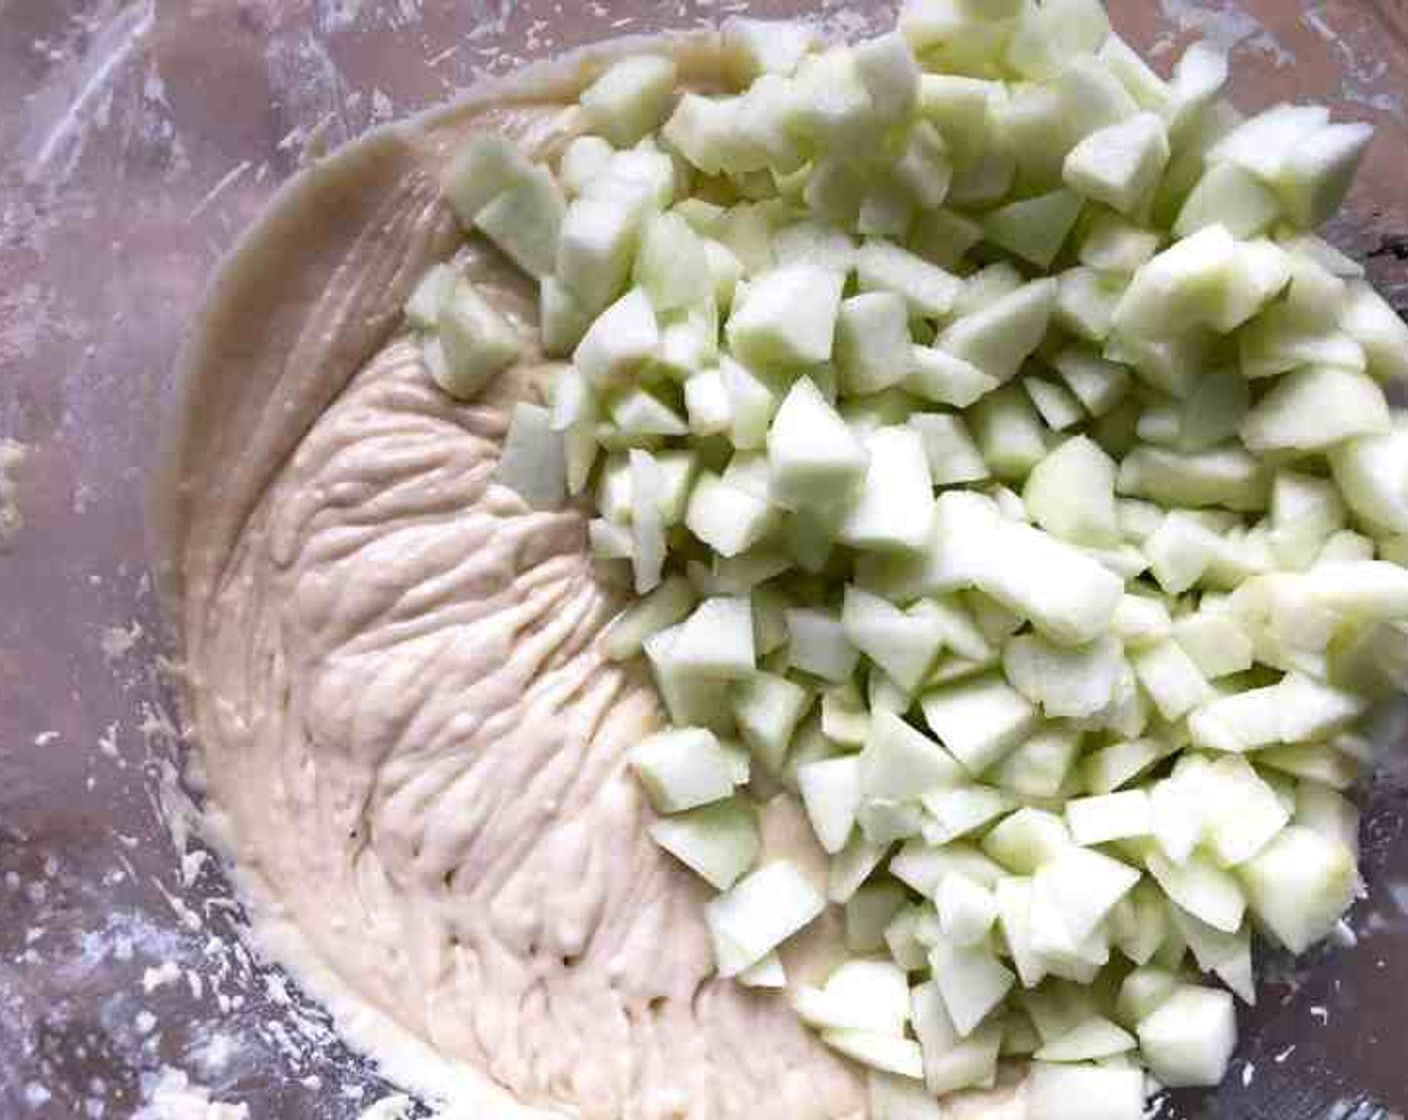 step 7 Add to the almond batter and beat until well blended. Then fold in the diced apples.